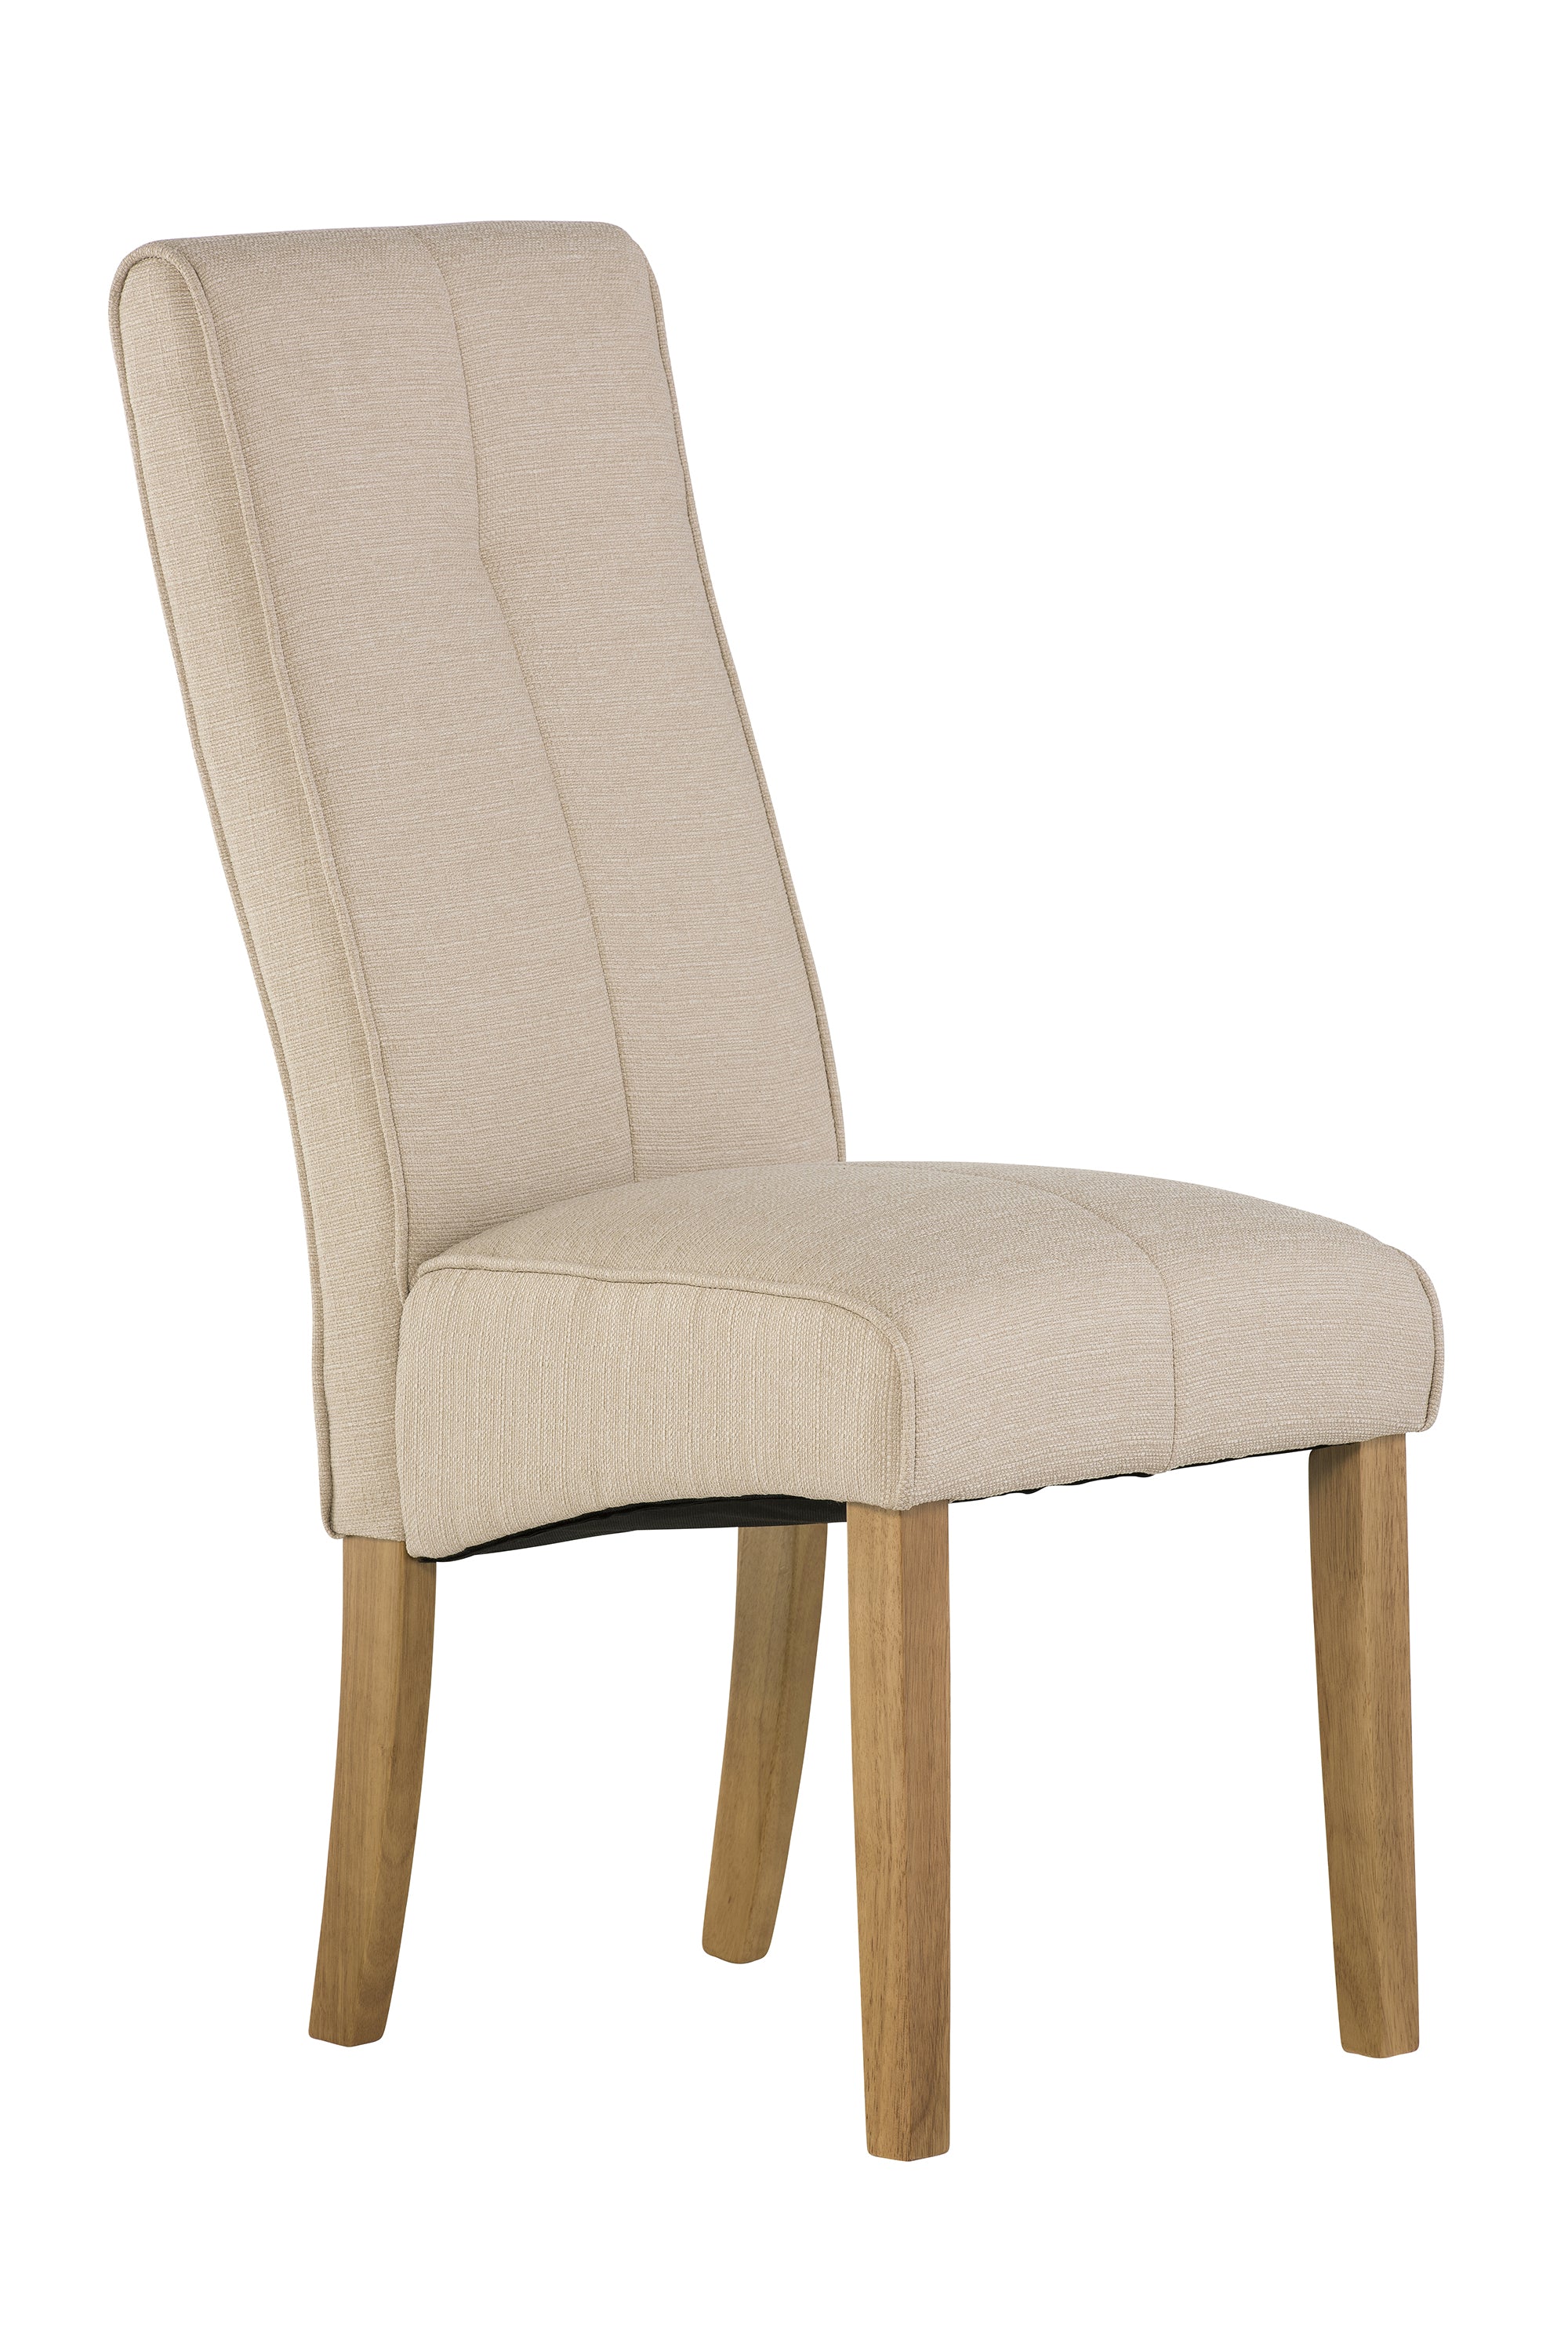 Denver Fabric Dining Chair